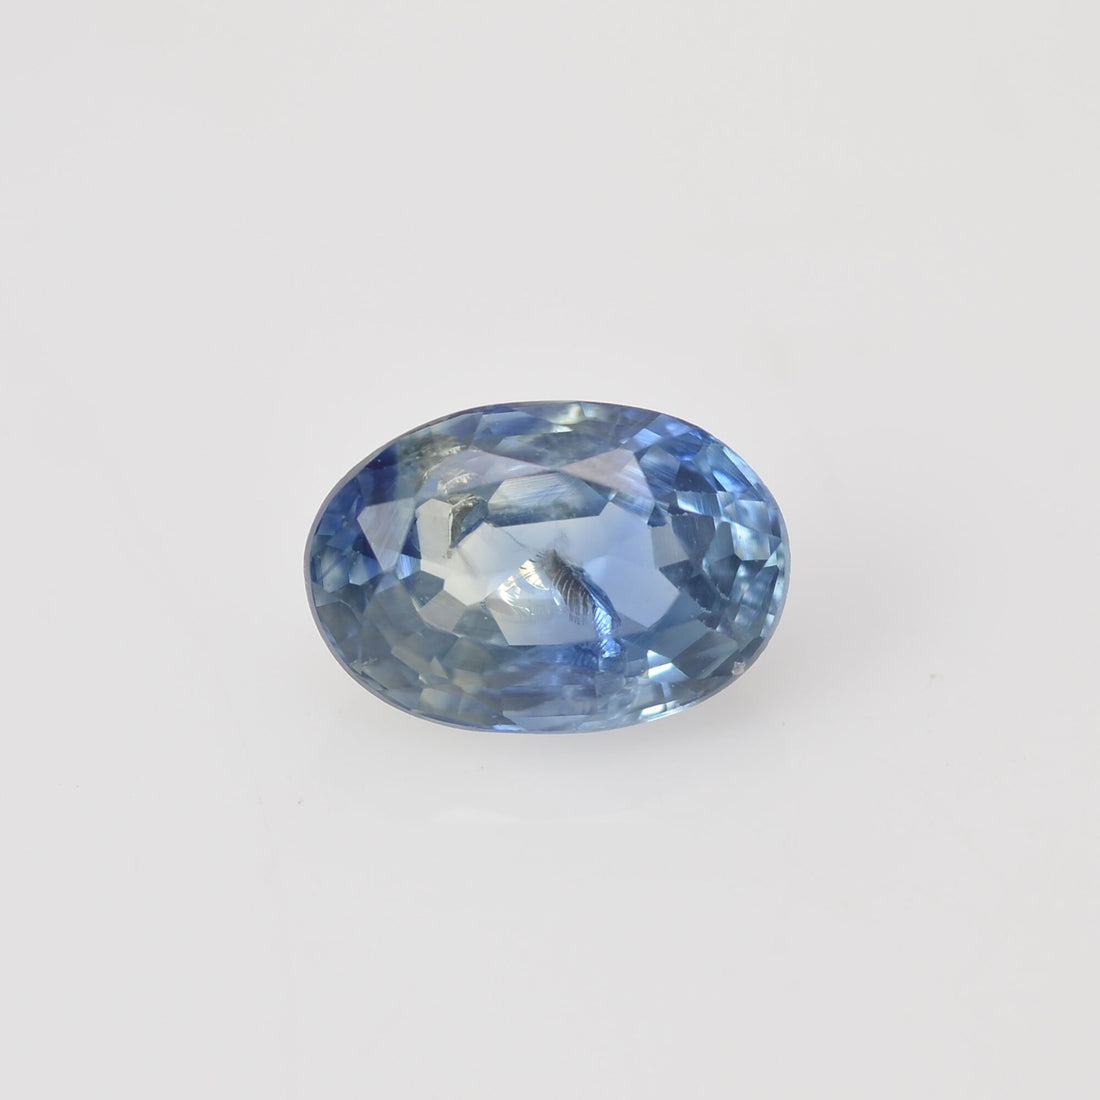 0.64 cts Natural Teal Sapphire Loose Gemstone Oval Cut